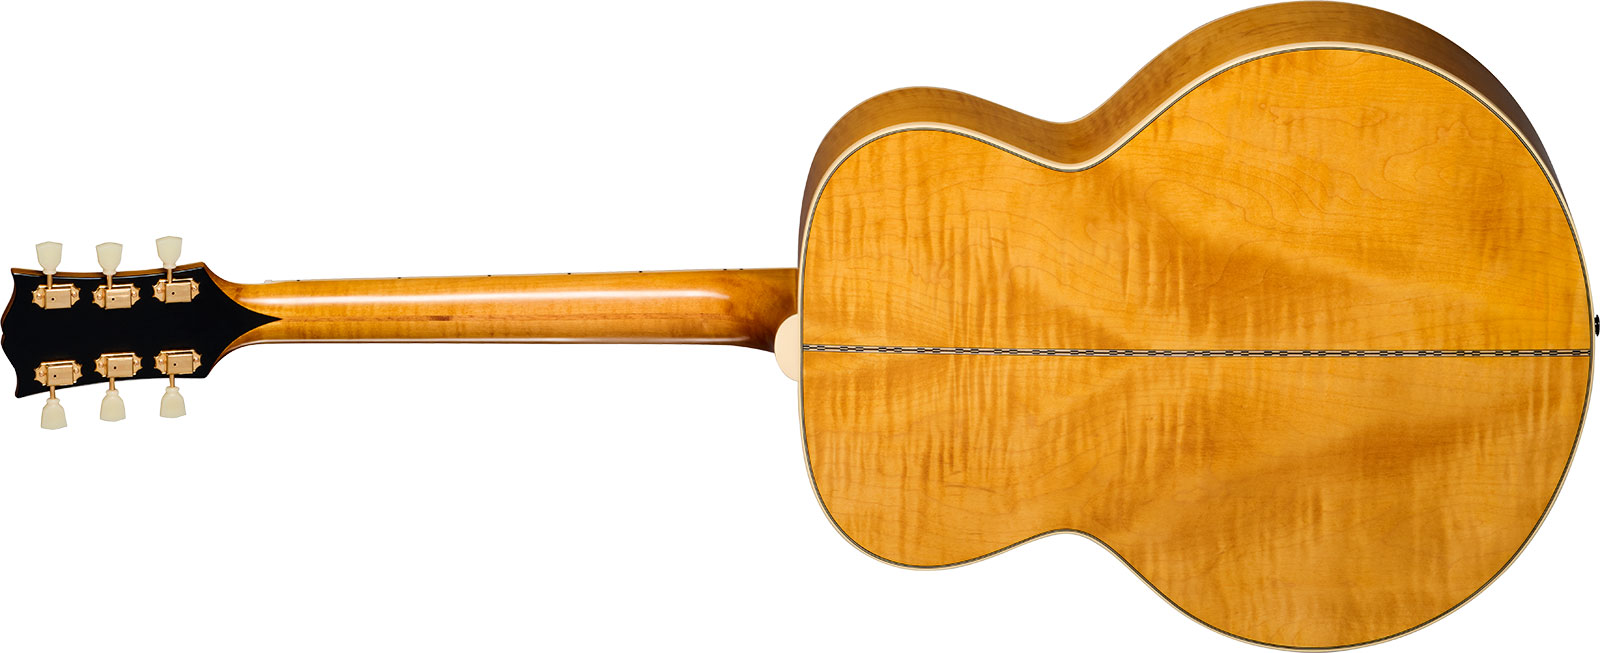 Epiphone Sj200 1957 Inspired By Jumbo Epicea Erable Lau - Antique Natural - Electro acoustic guitar - Variation 1